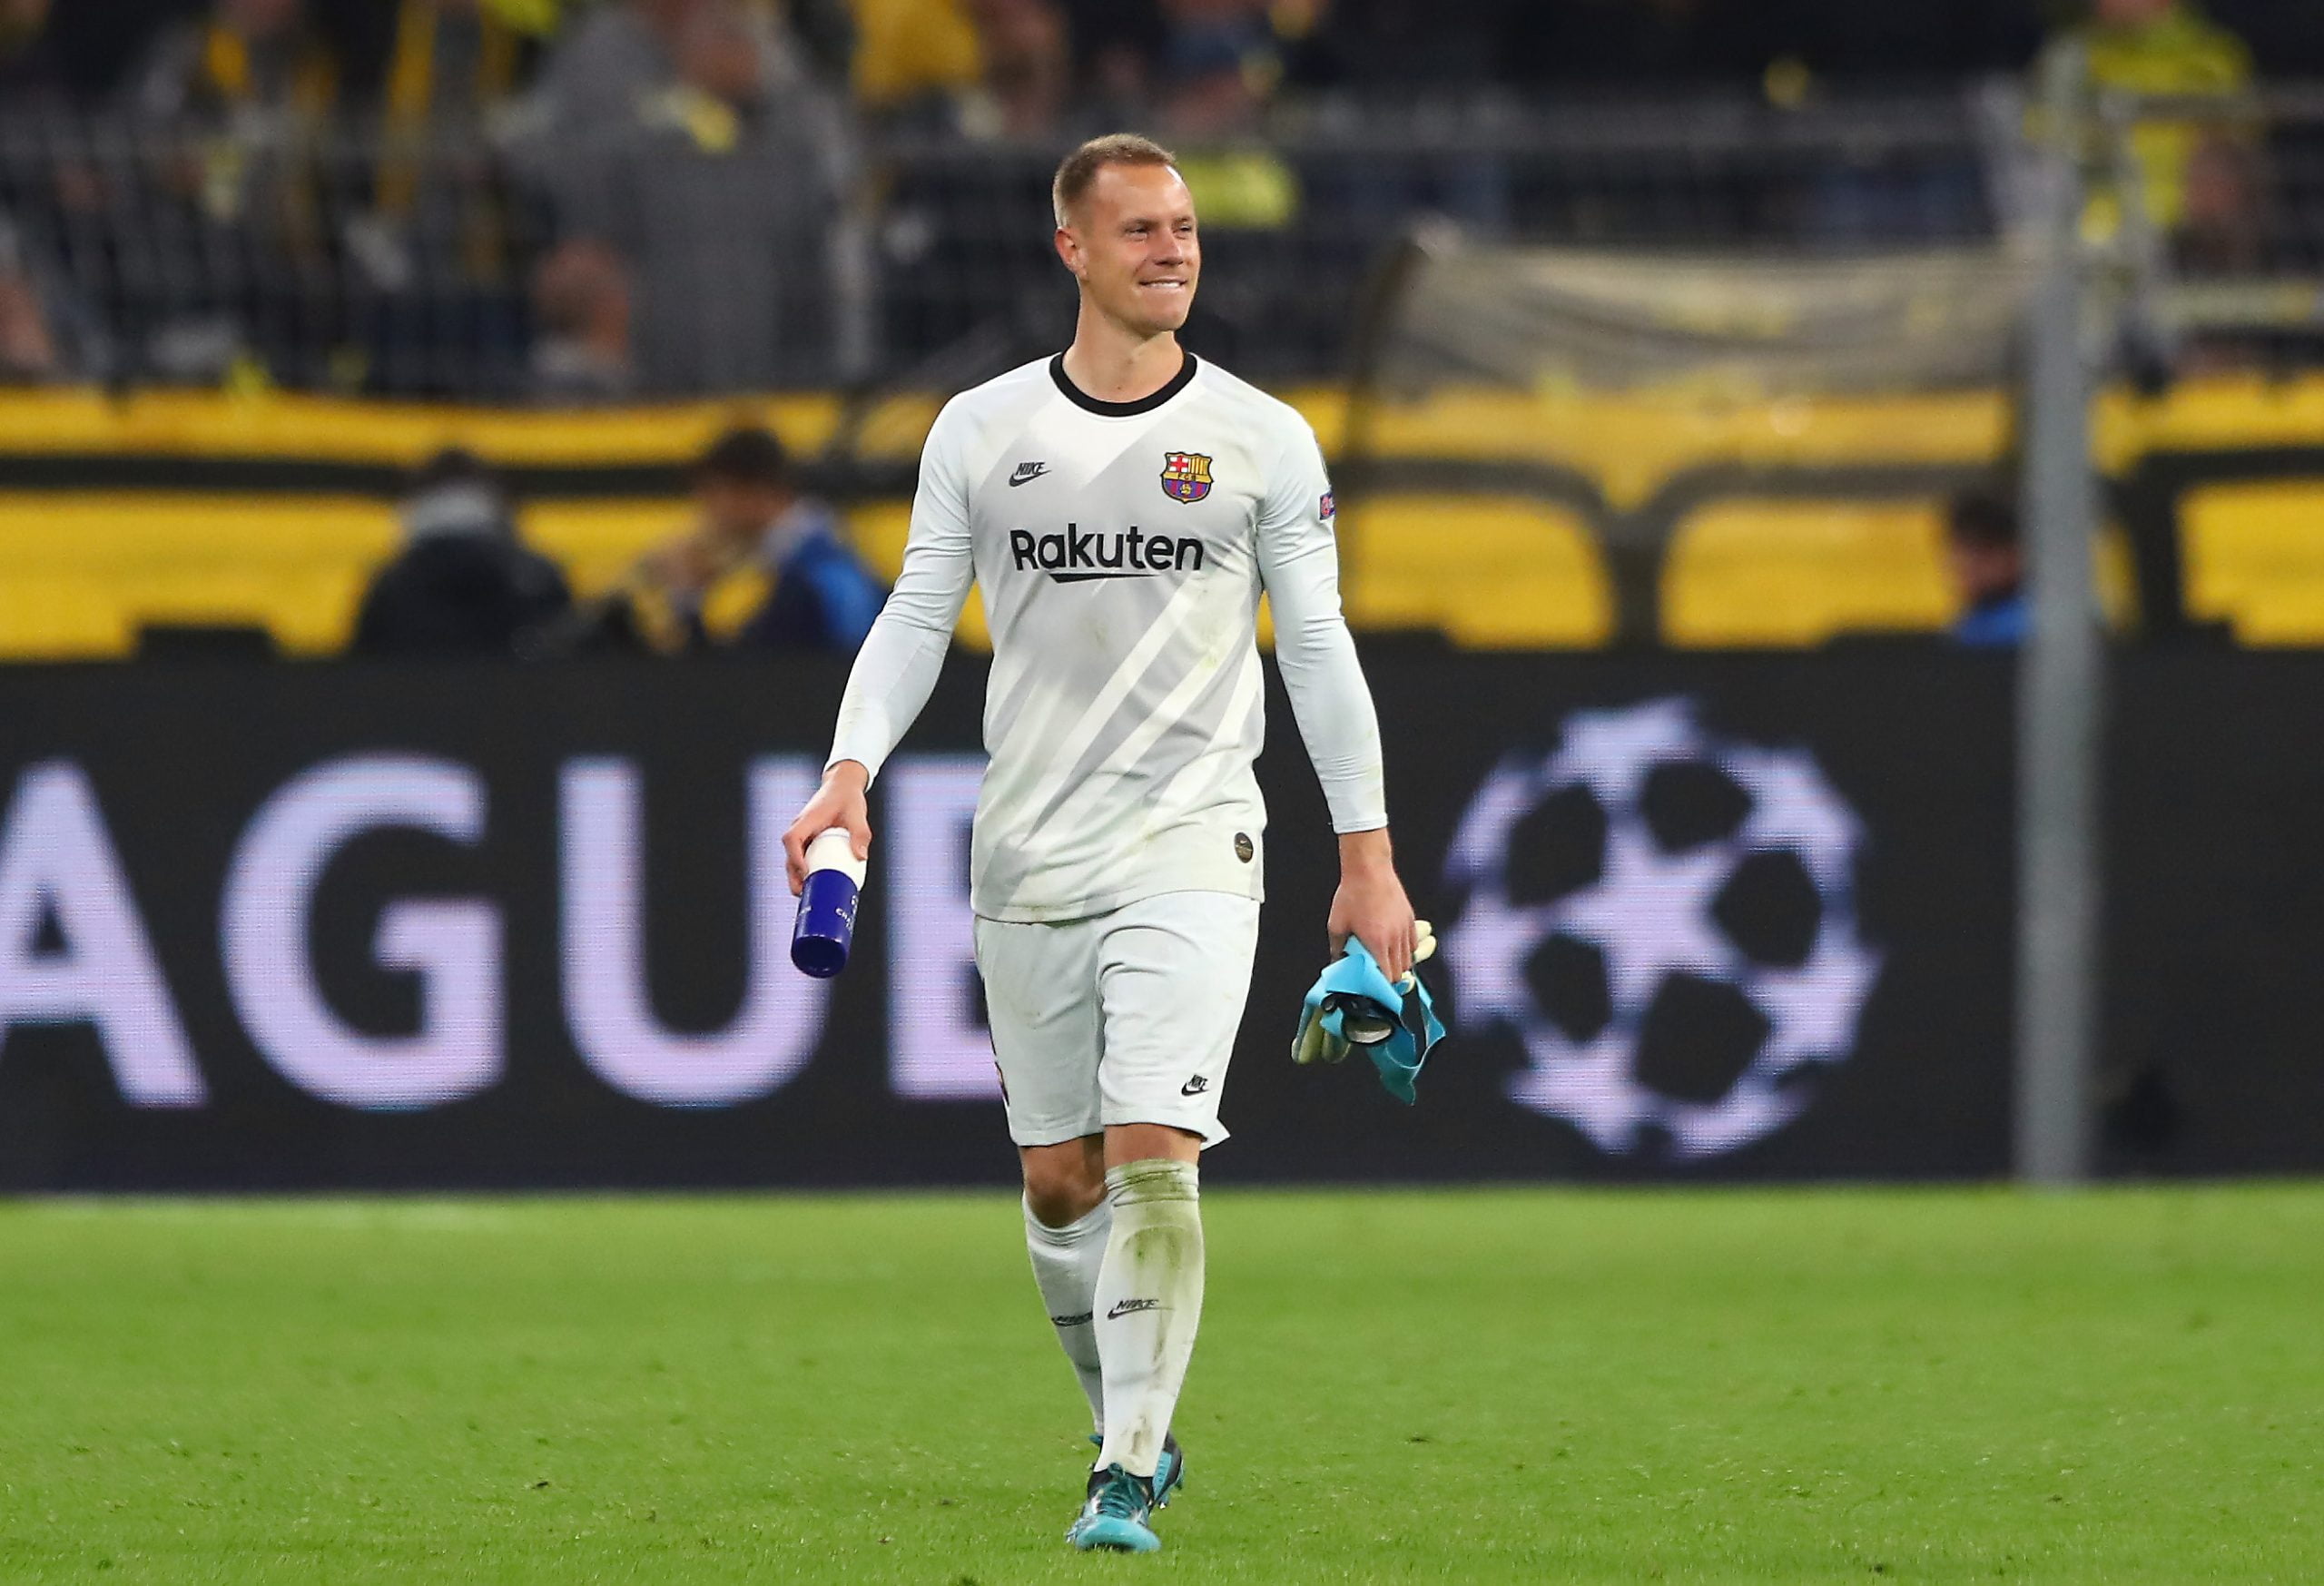 Marc-André ter Stegen of FC Barcelona looks on after the UEFA Champions League group F match between Borussia Dortmund and FC Barcelona at Signal Iduna Park on September 17, 2019 in Dortmund, Germany. (Photo by Martin Rose/Bongarts/Getty Images)